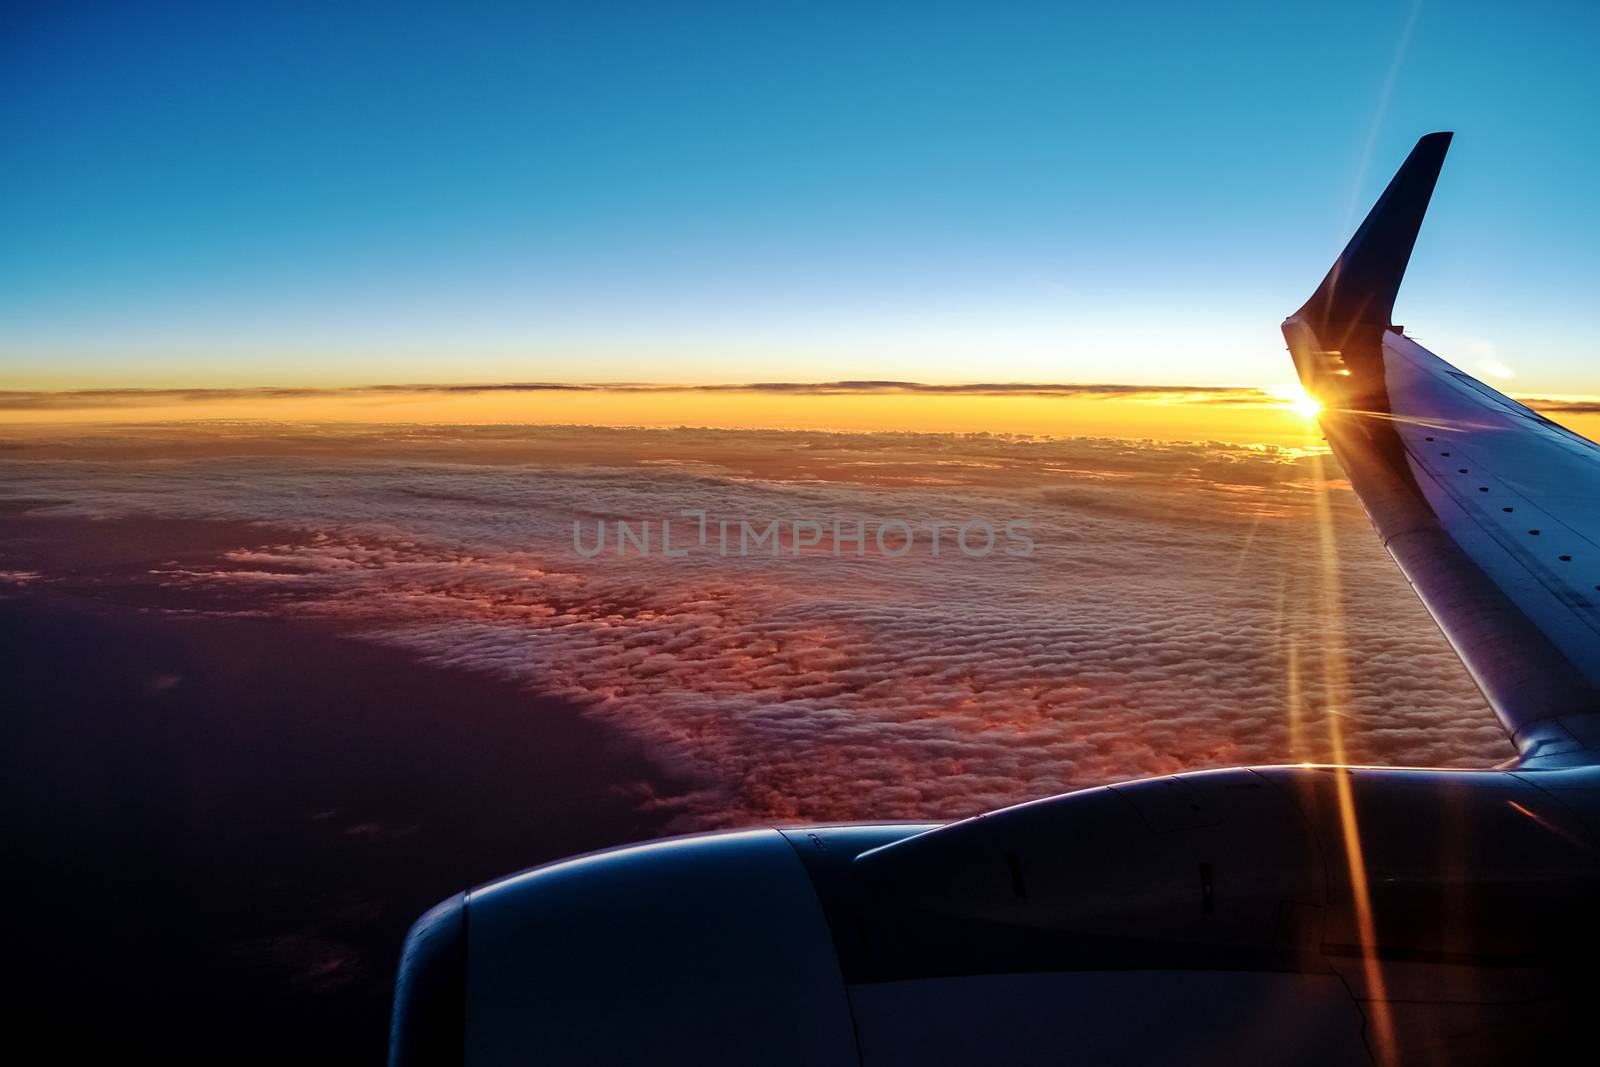 Sunset from a plain. View through the window of an aircraft. Wing of the plane above clouds.